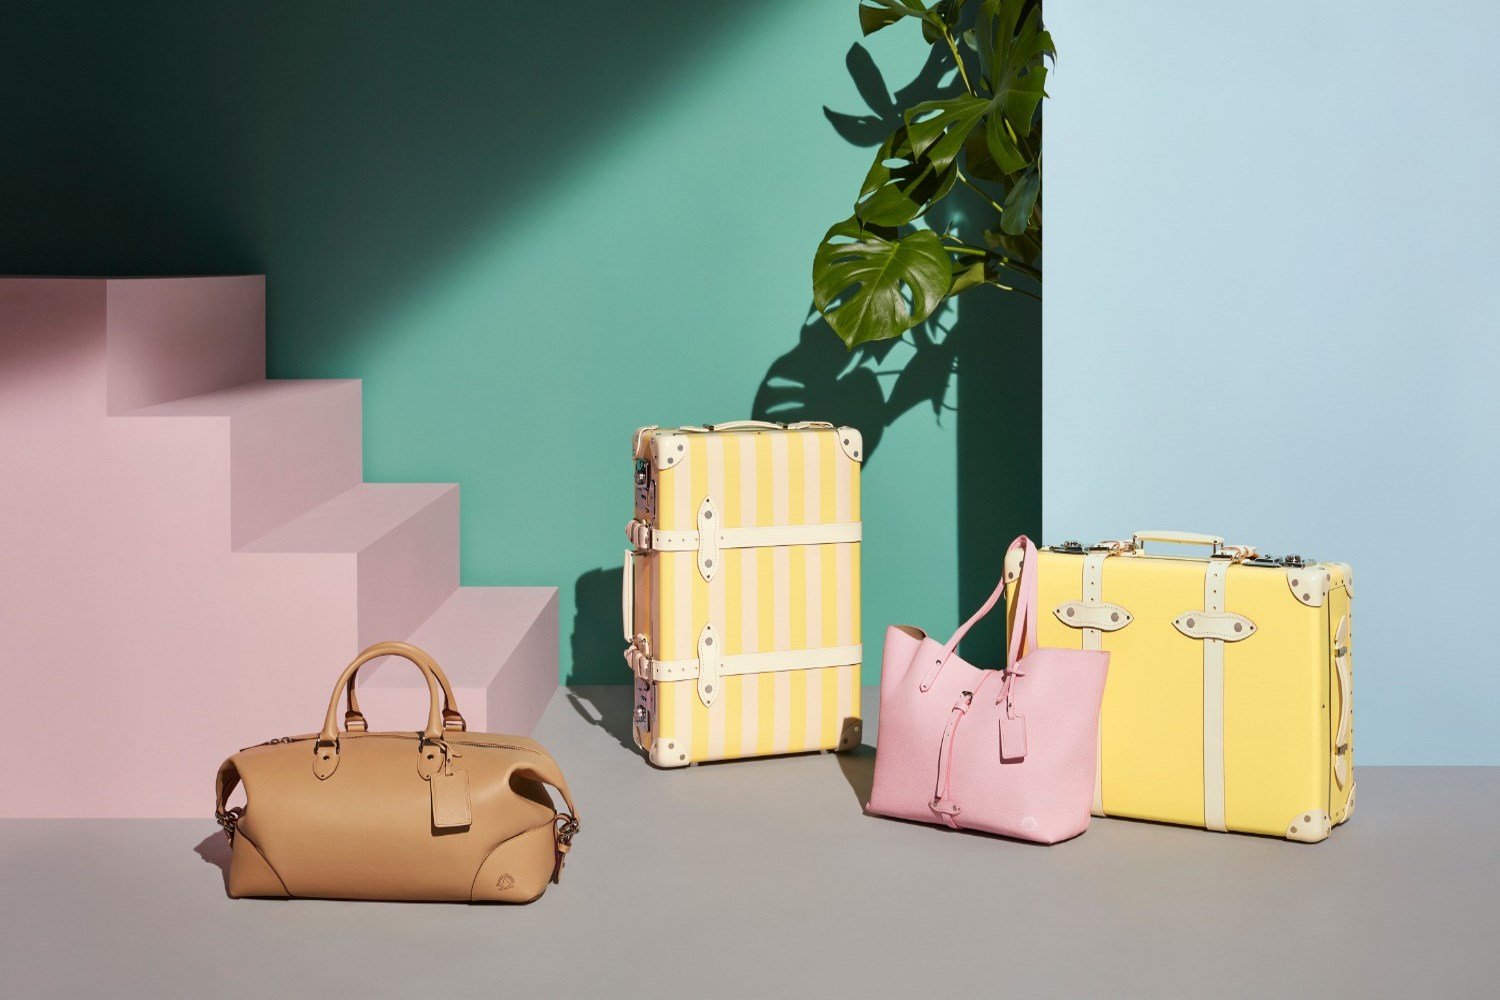 Introducing the newest member of our Louis Vuitton family: Fleur